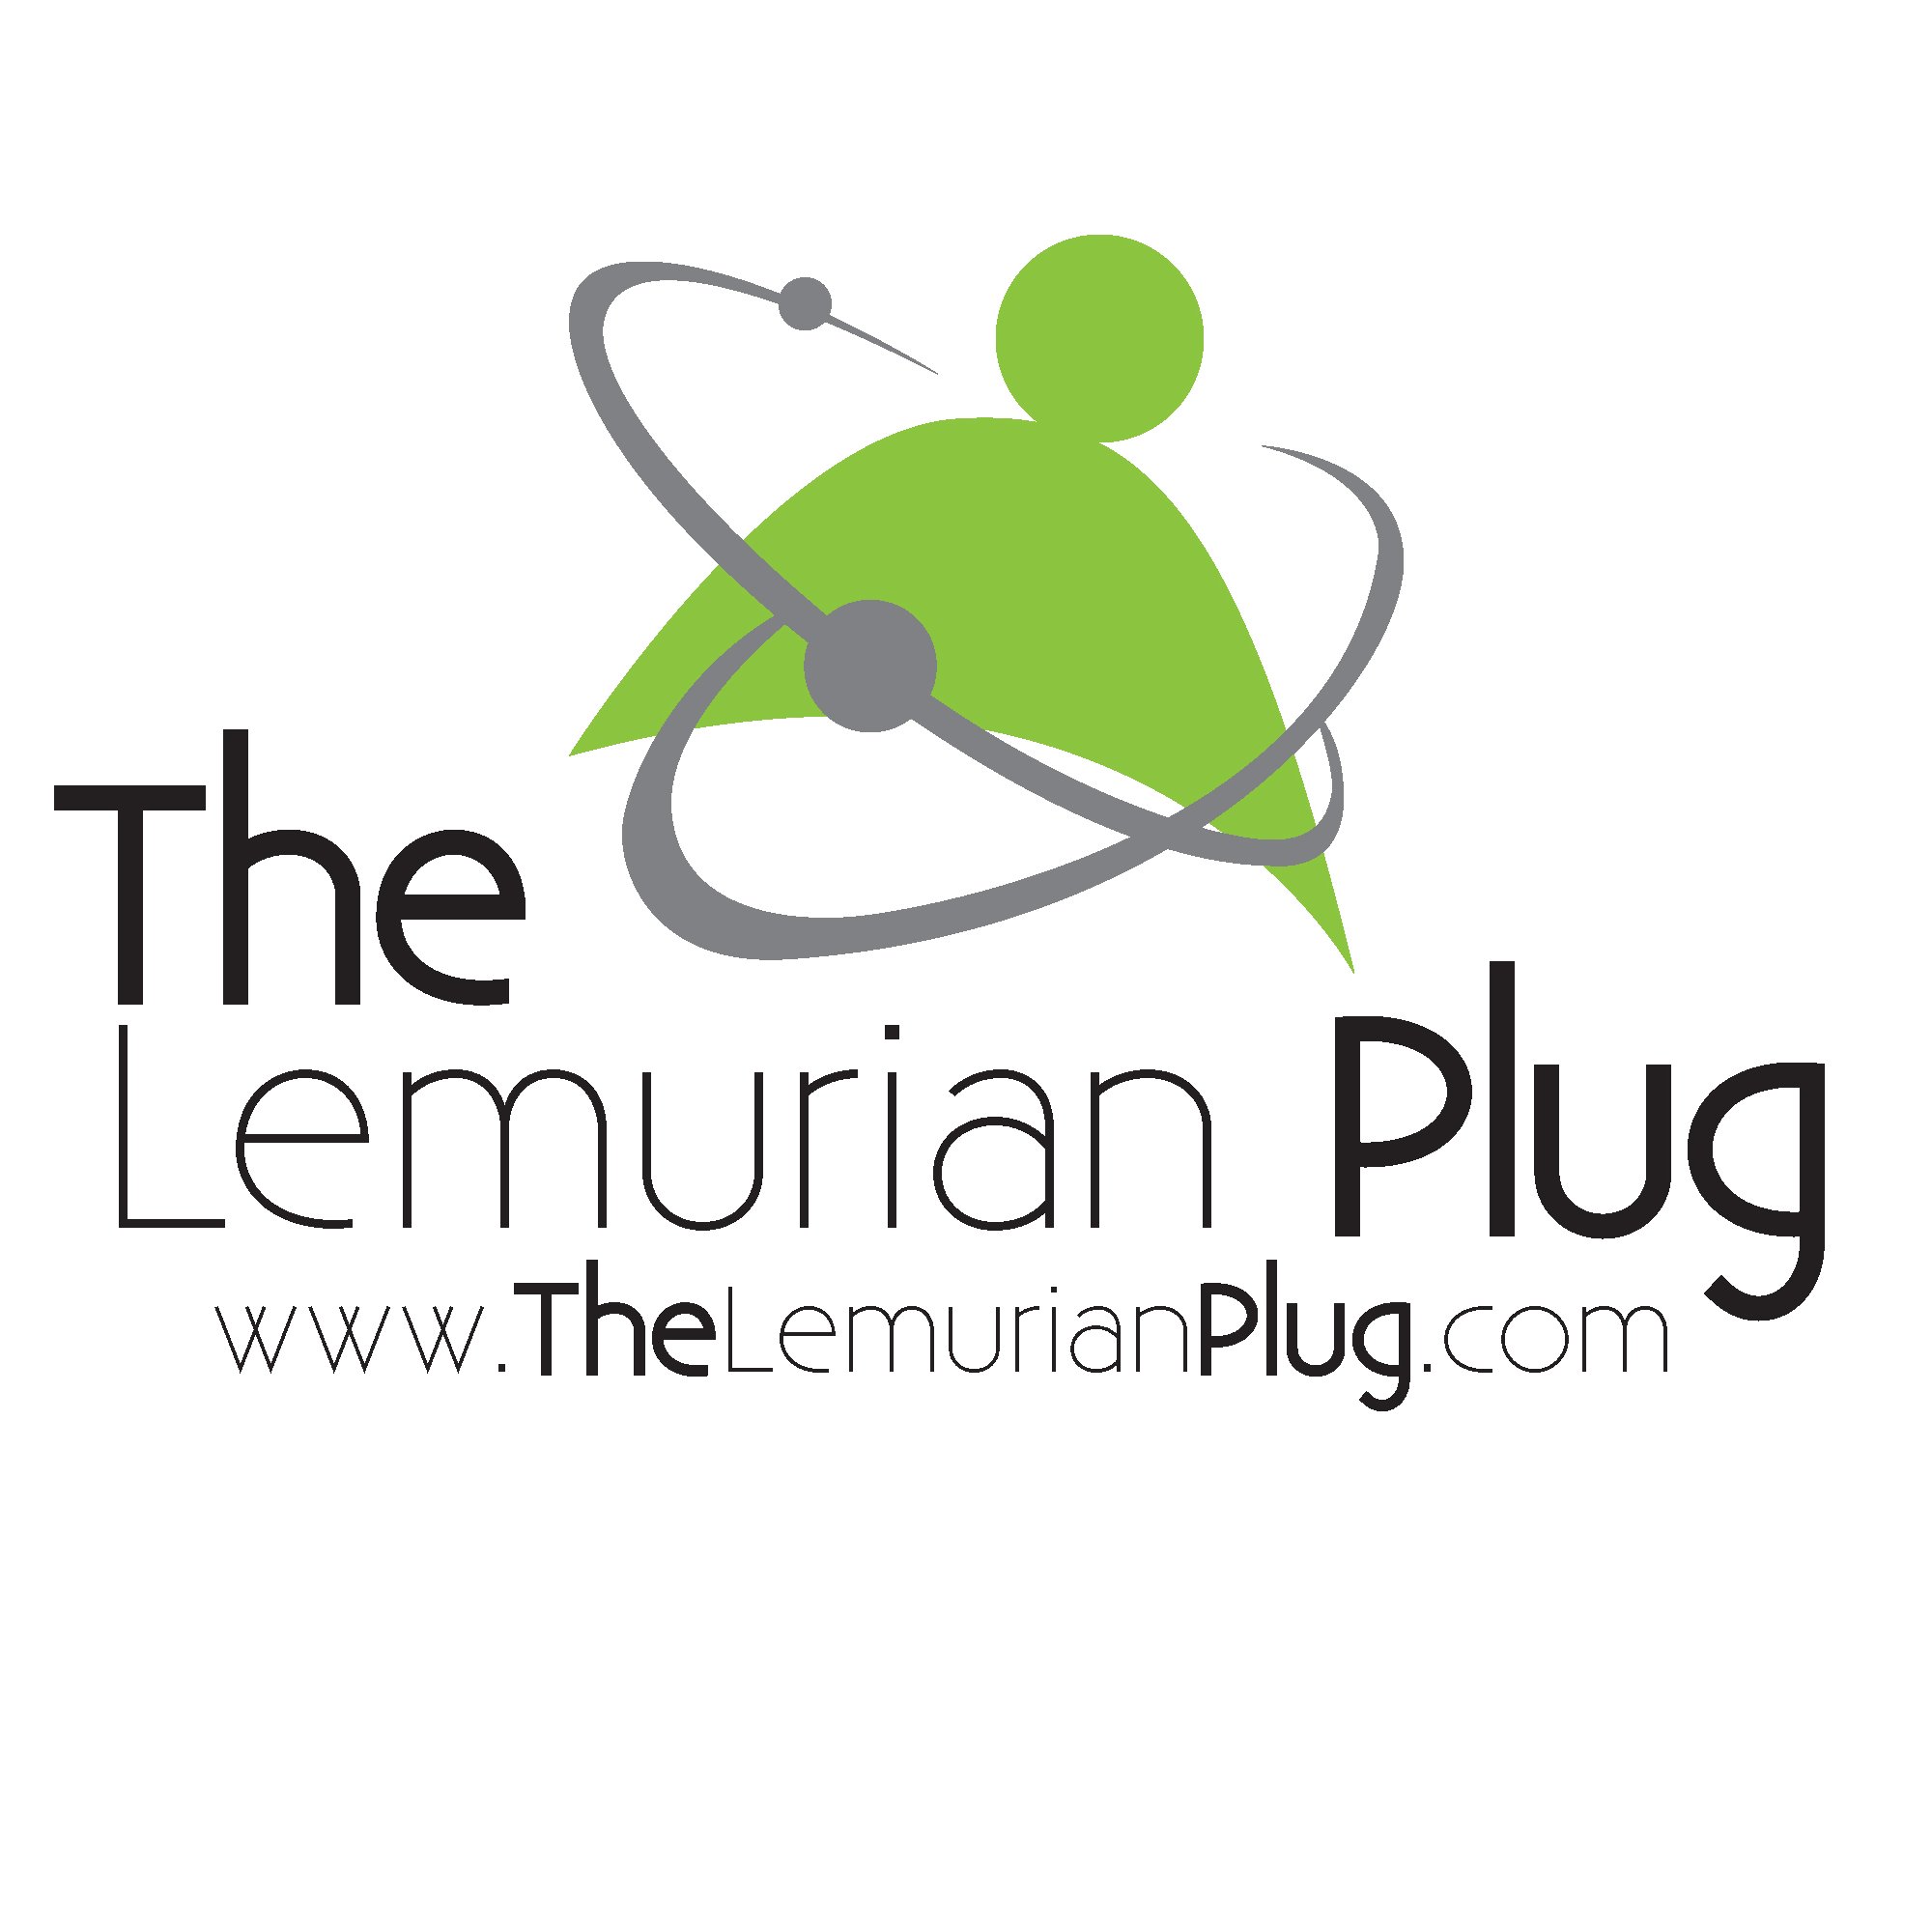 The Lemurian Plug is 'charged'
 with an ancient technology that has many benefits. Please read about it https://t.co/z79snYG6Ee